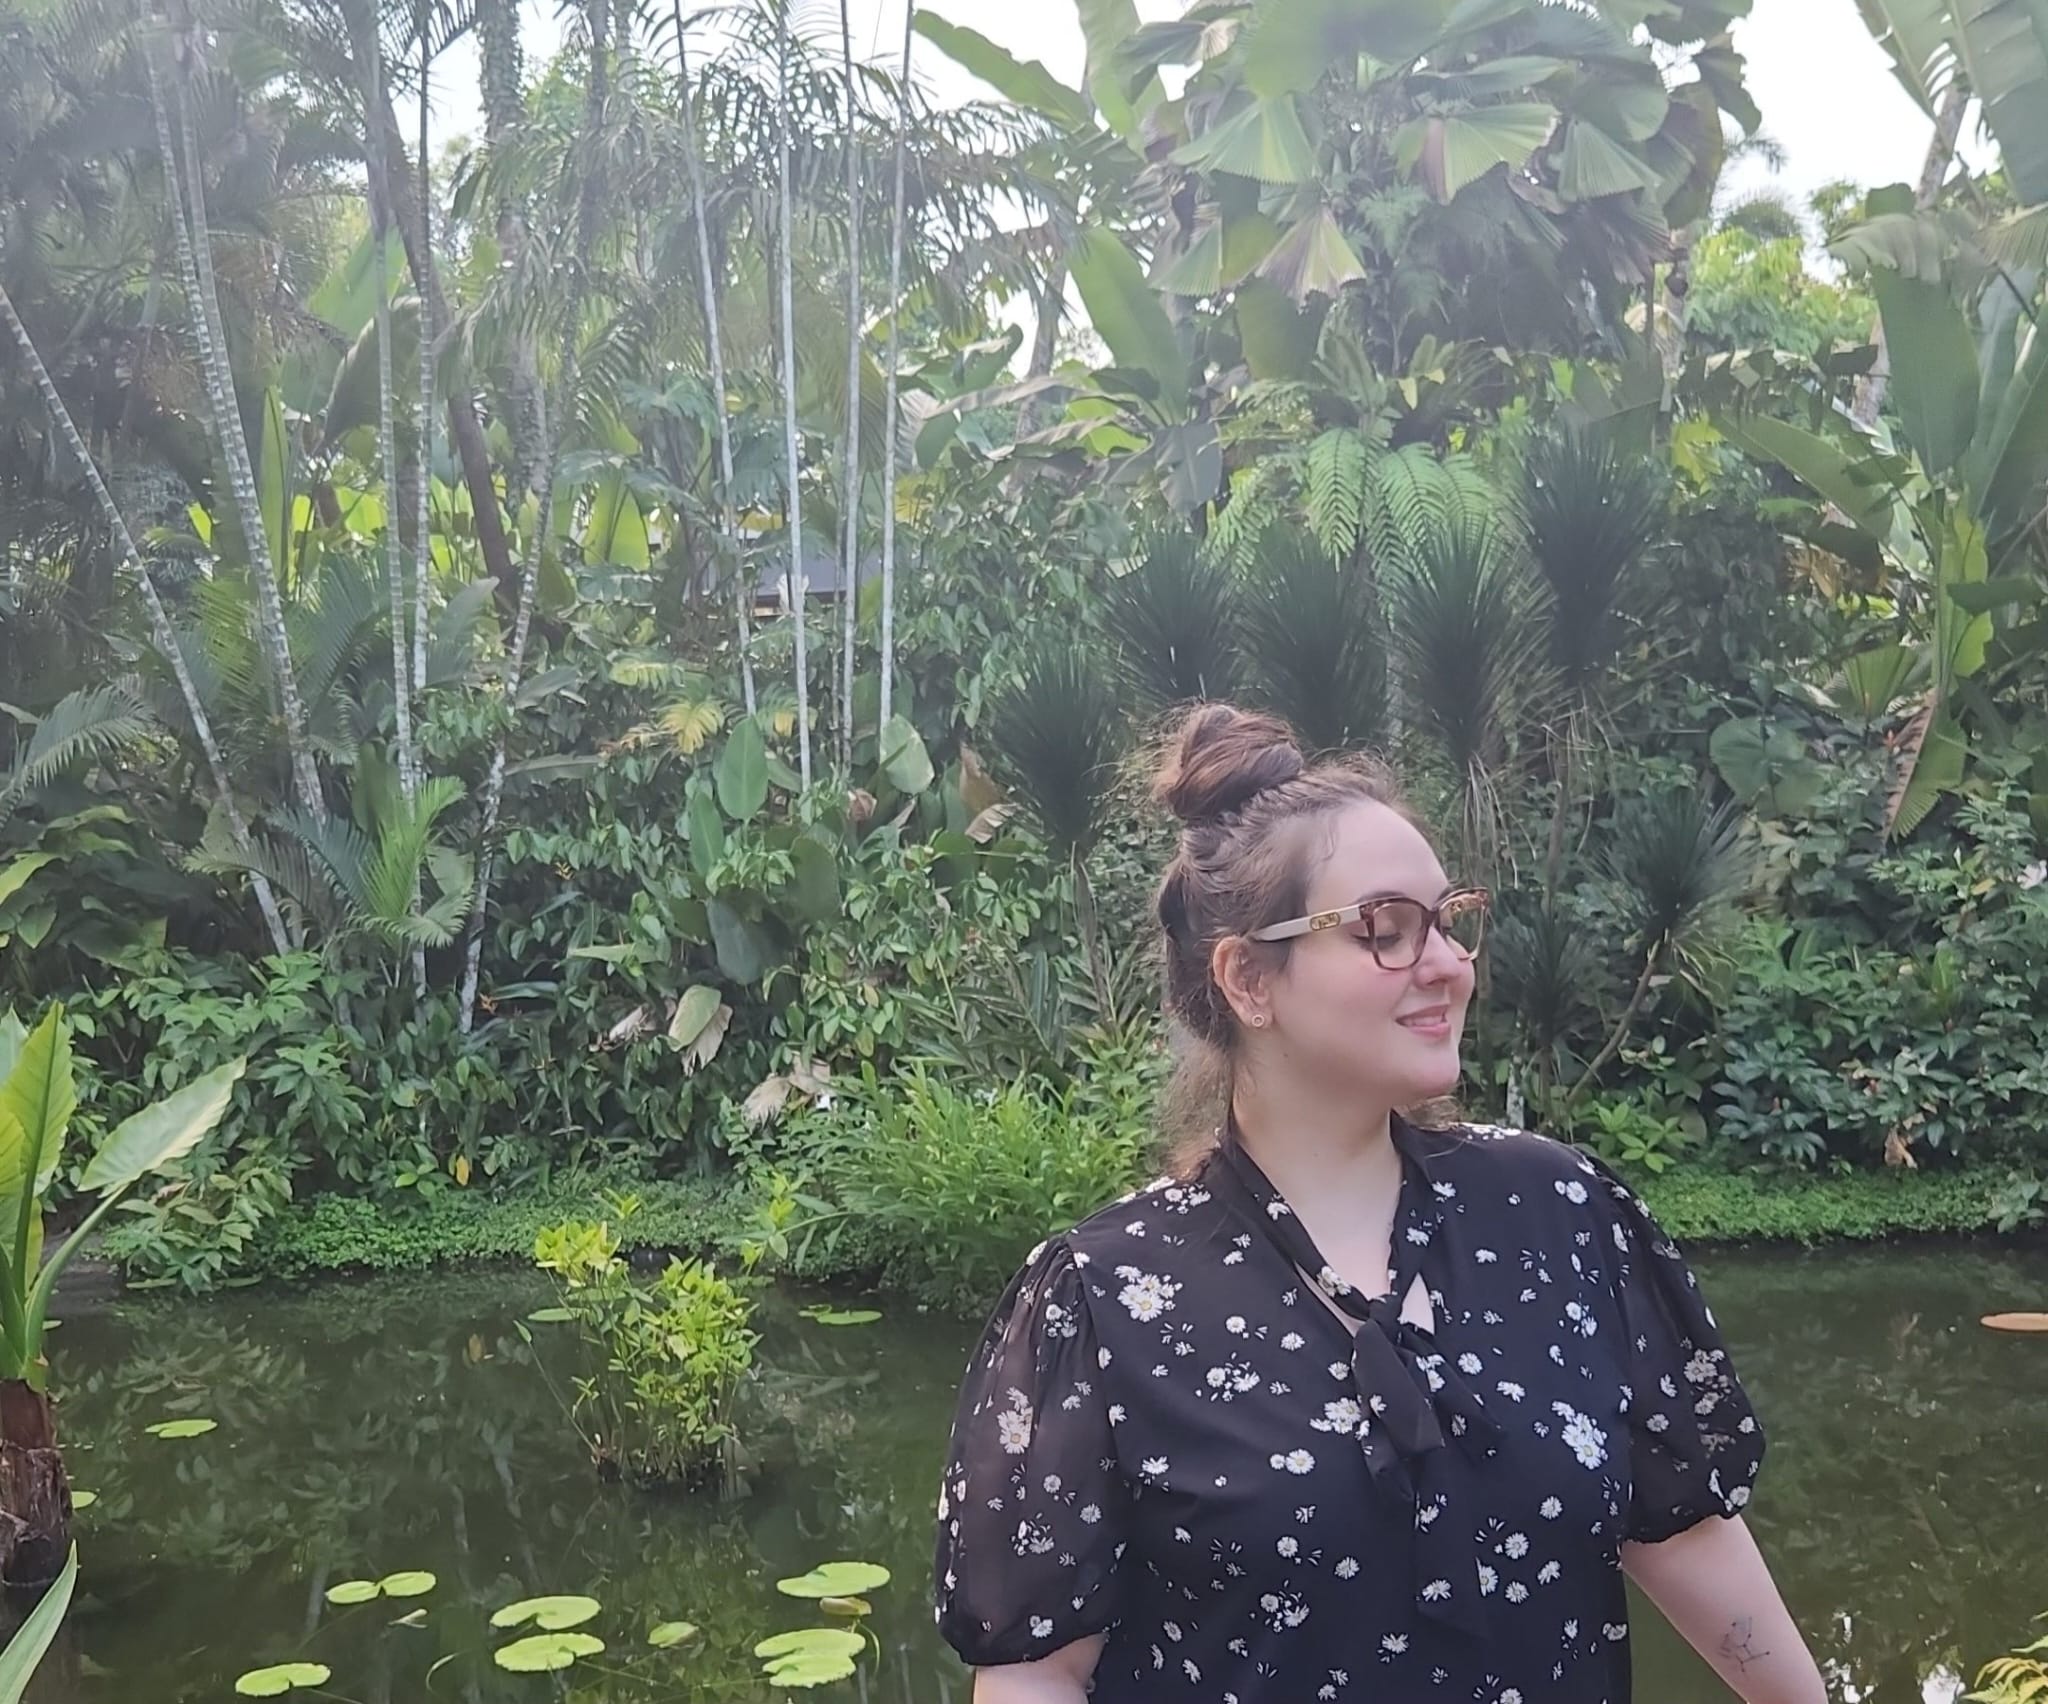 Picture of a person smiling with eyes closed in front of a background of green plants, trees, and a body of water.